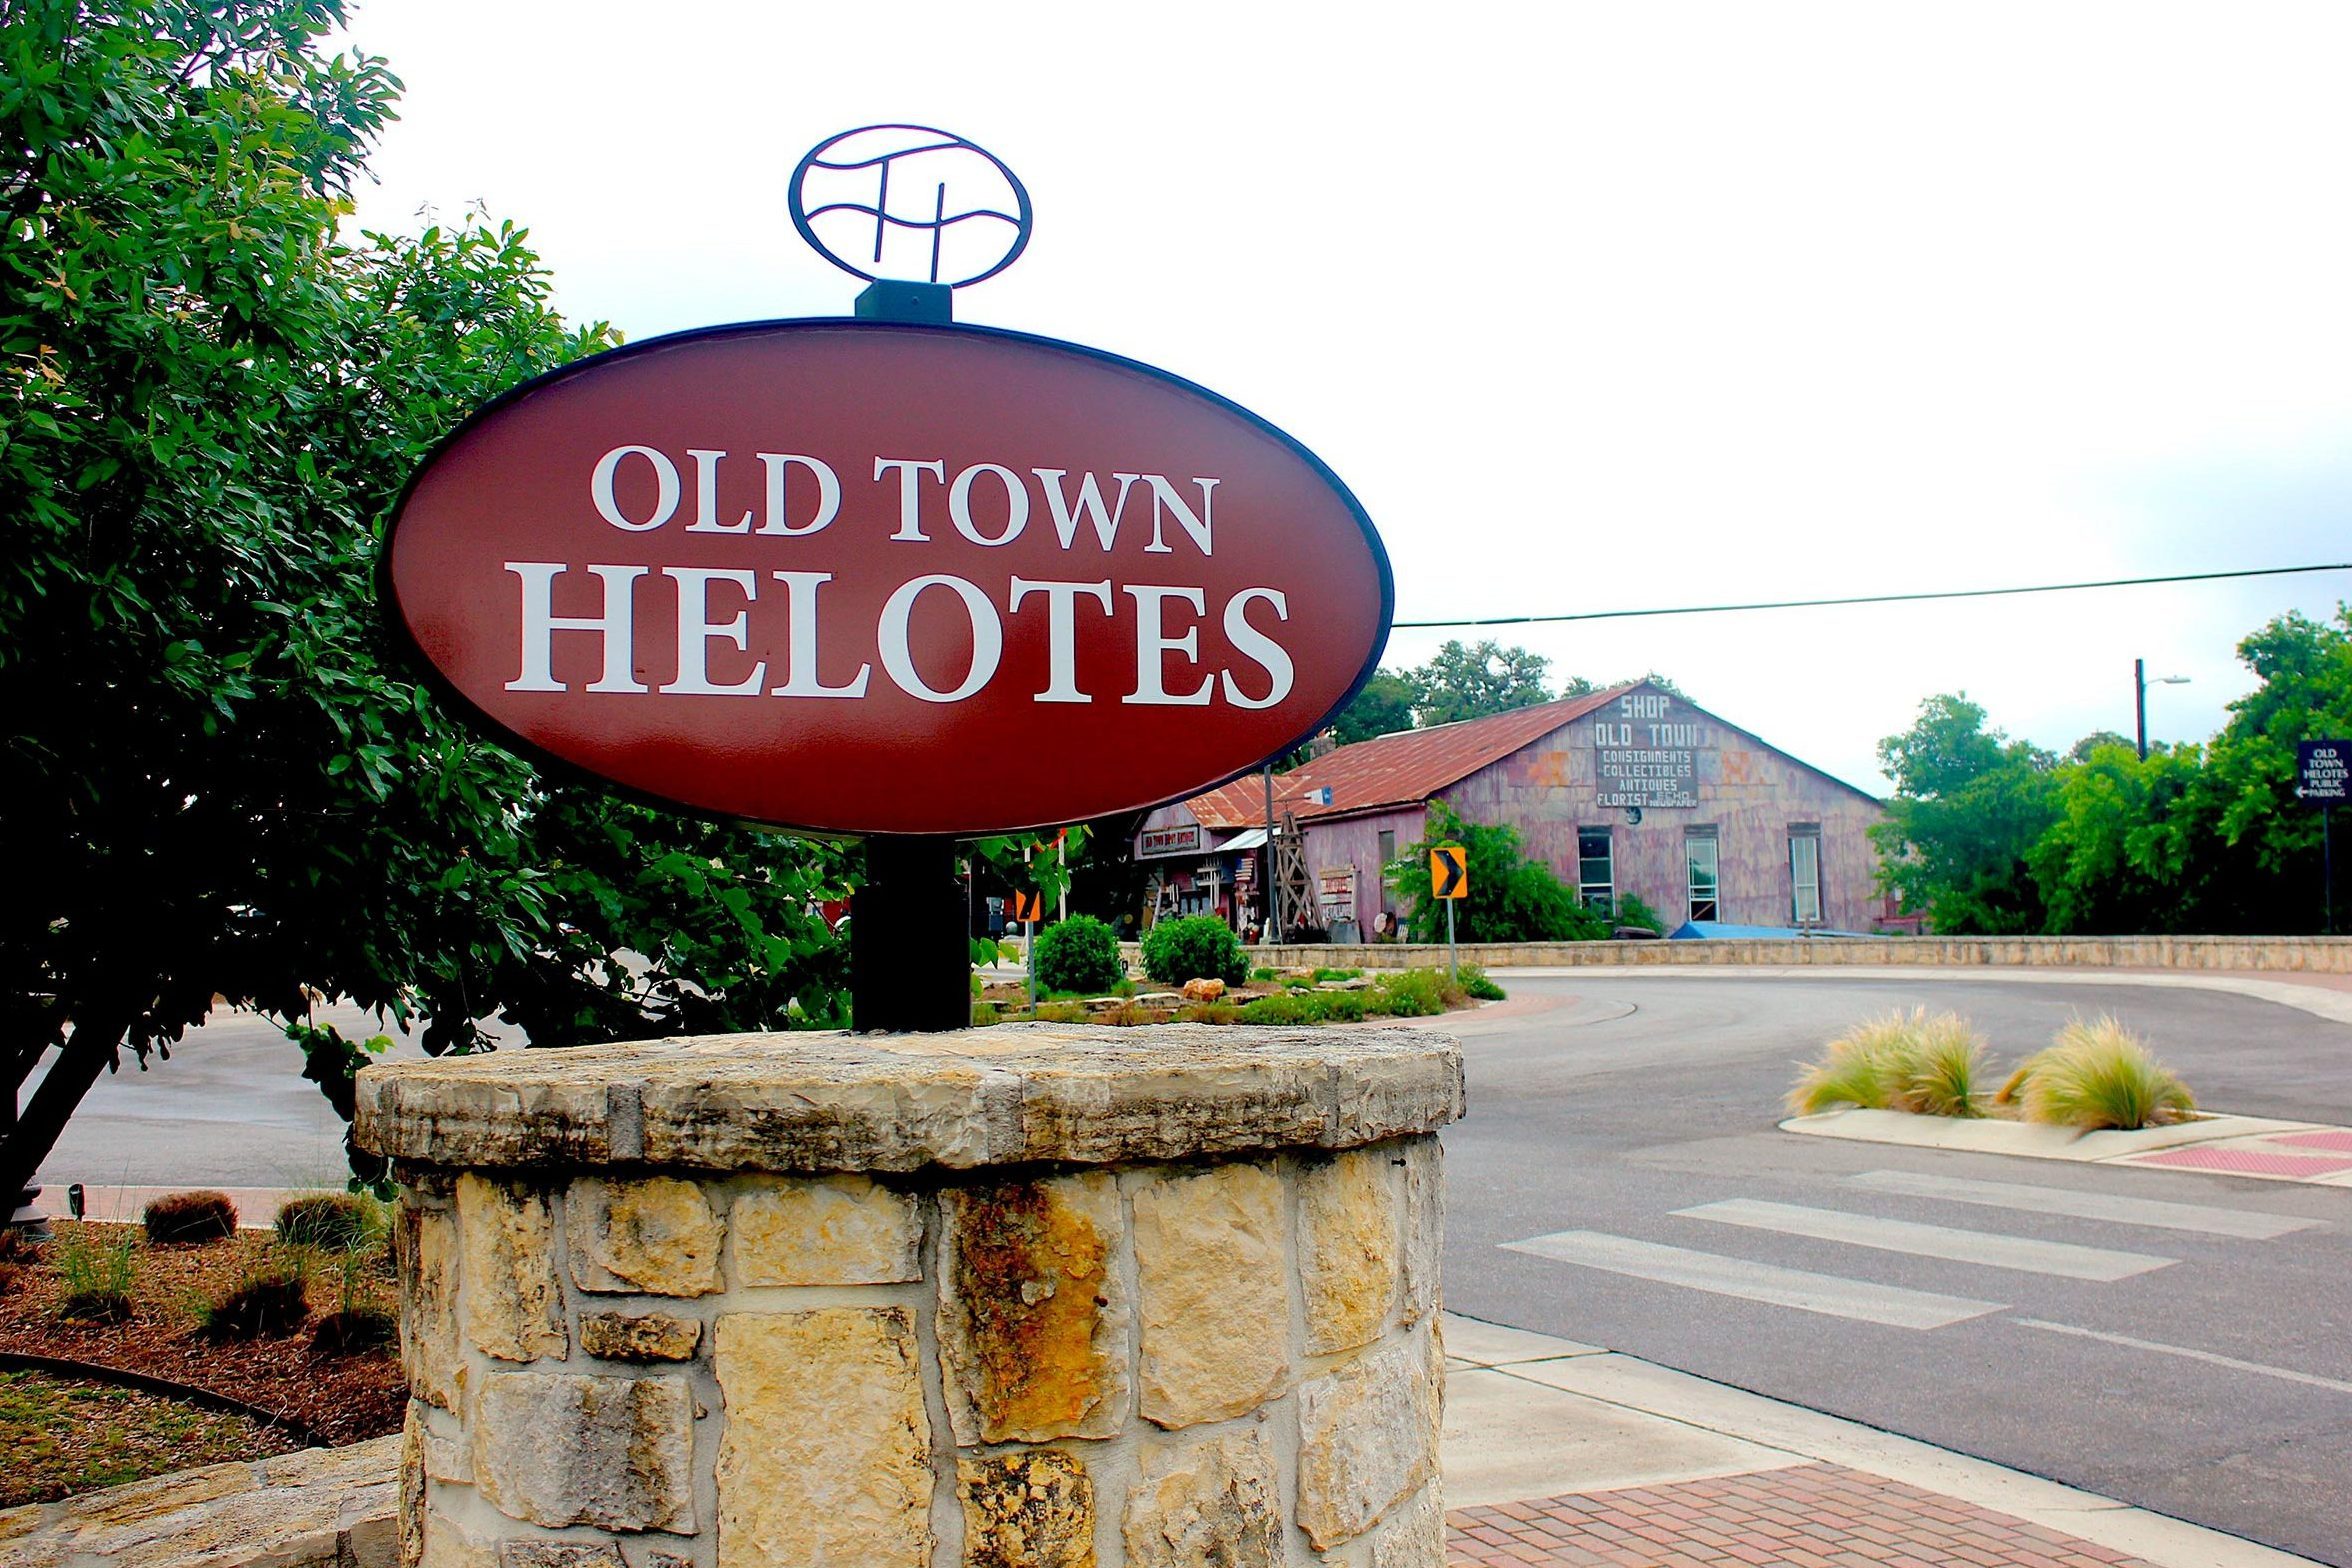 <p>"One of the best hidden gems in Texas is tucked away in Texas Hill Country," reveals PR pro Crystal Henry. Also tucked away are the <a href="http://www.shopsatoldtown.com/" rel="nofollow noopener noreferrer">Shops at Old Town Helotes</a>. "This beautiful strip of shops and restaurants is actually home to Floore's Country Store, the little honky-tonk place where Willie Nelson got his start. New shops and boutiques are opening all the time, but if nothing else, it's worth the trip to start your morning at The Cracked Mug coffee house and end it with a glass of red at Wine 101," Henry tells <em>Reader's Digest.</em></p> <p class="listicle-page__cta-button-shop"><a class="shop-btn" href="http://www.shopsatoldtown.com/">Learn More</a></p>